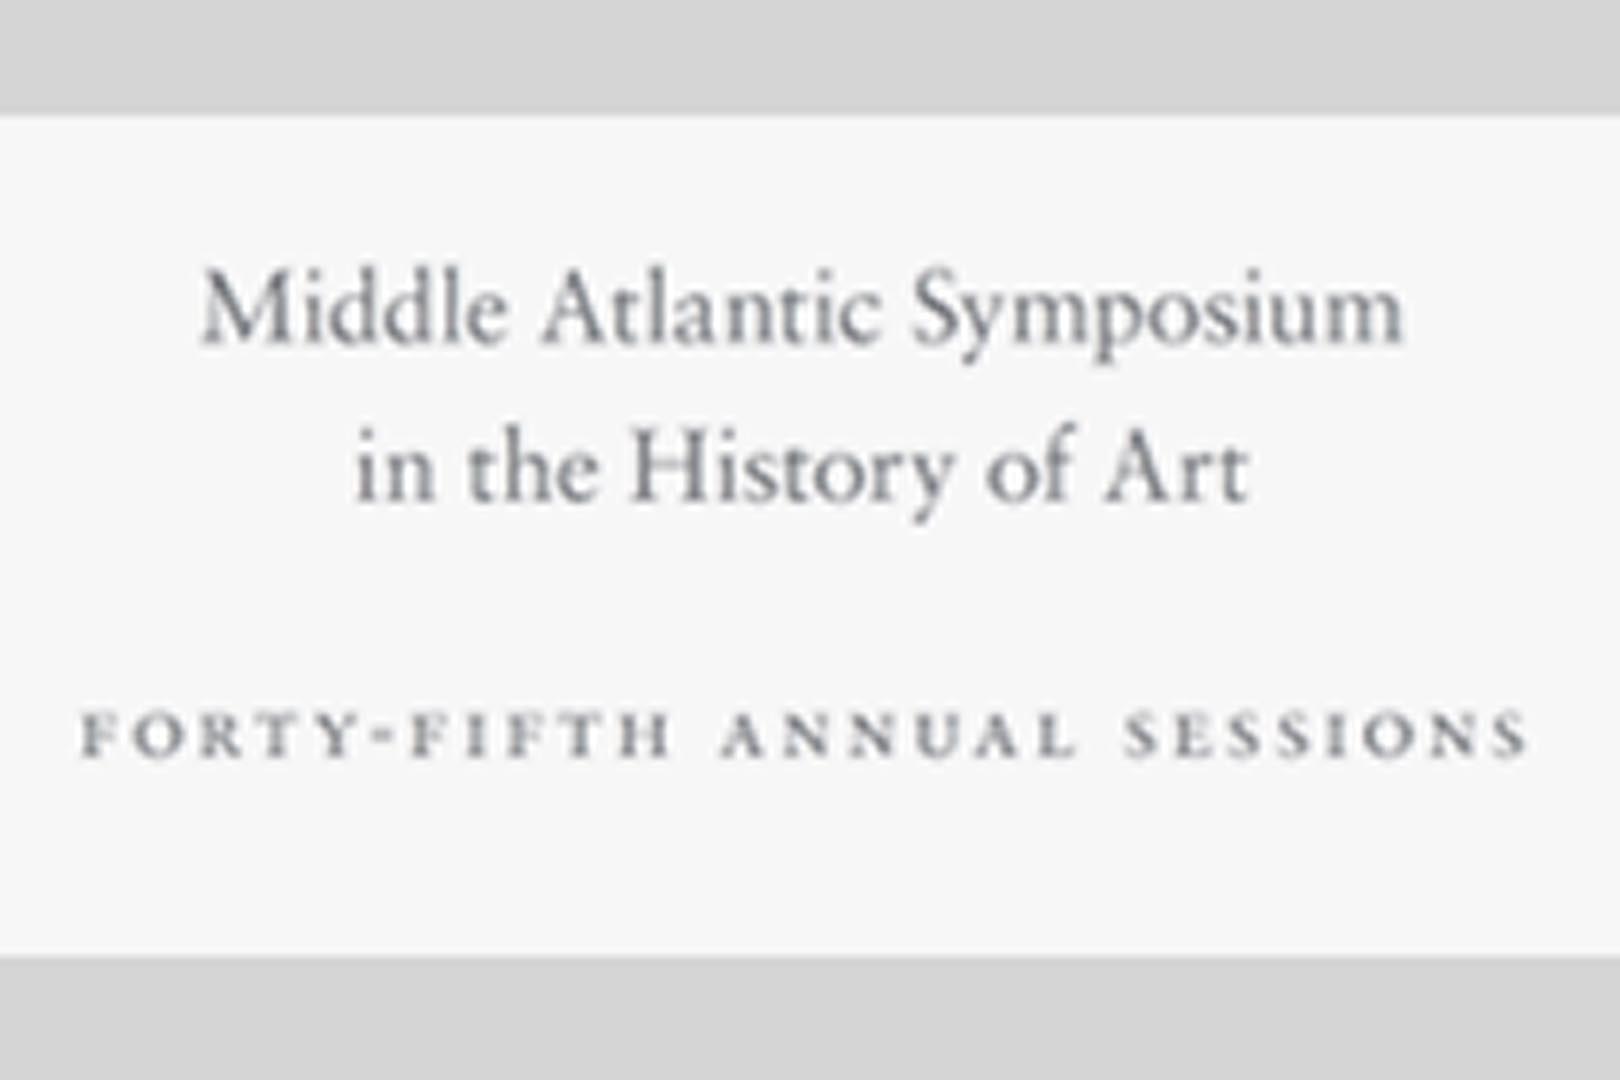 45th Annual Sessions of the Middle Atlantic Symposium in the History of Art